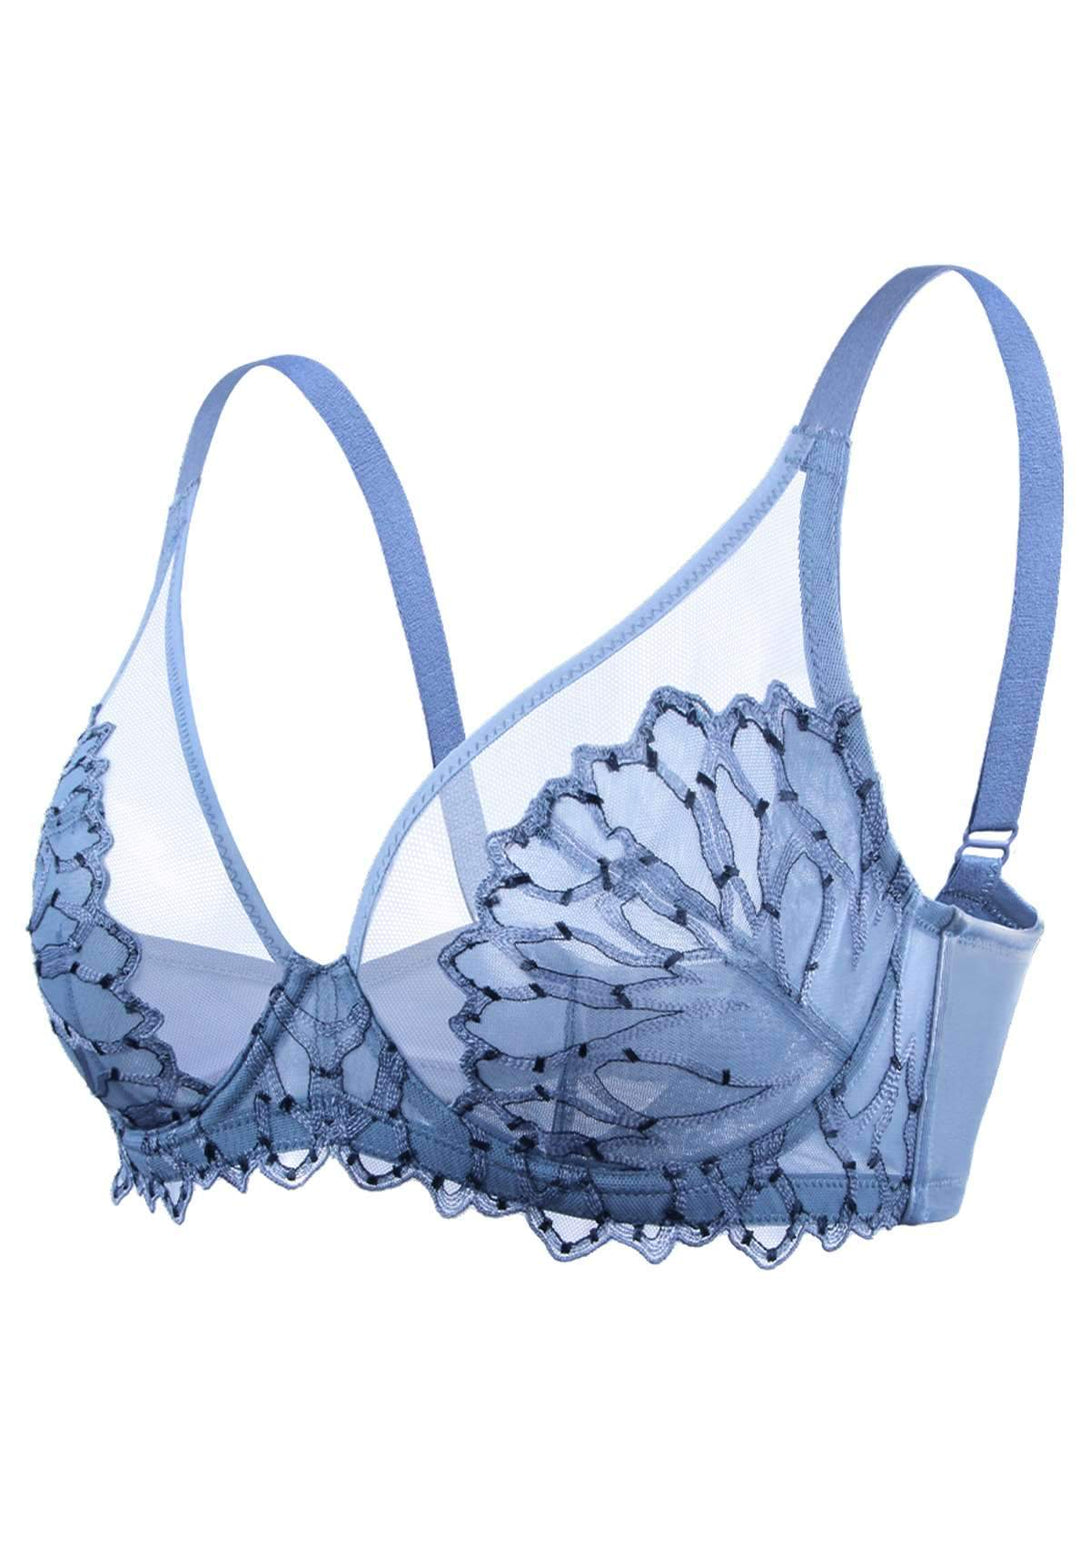 HSIA Chrysanthemum Plus Size Lace Bra: Back Support Bra for